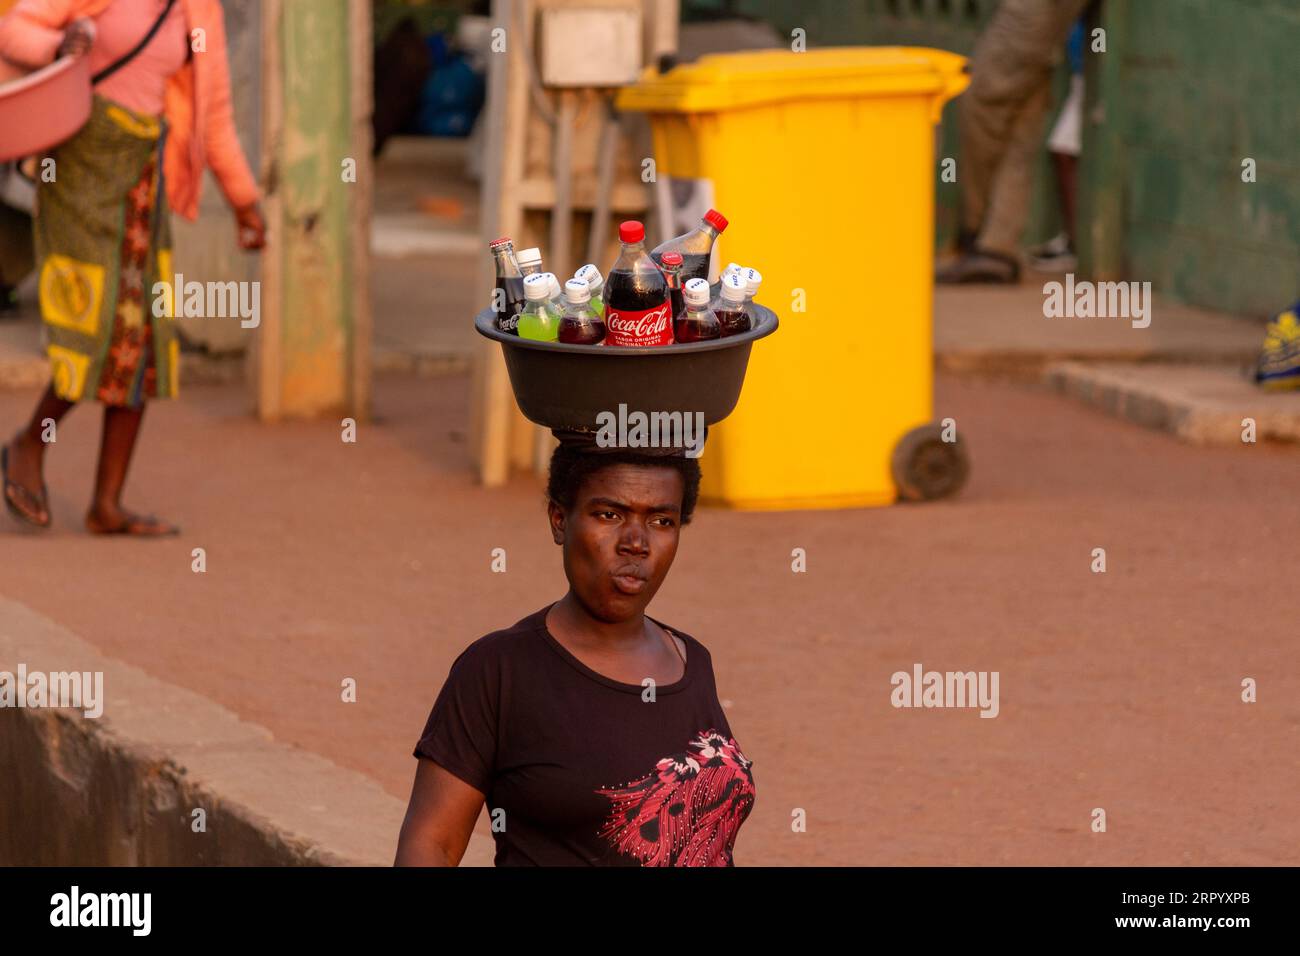 African Woman Carrying Packaged Beverages on Her Head Stock Photo